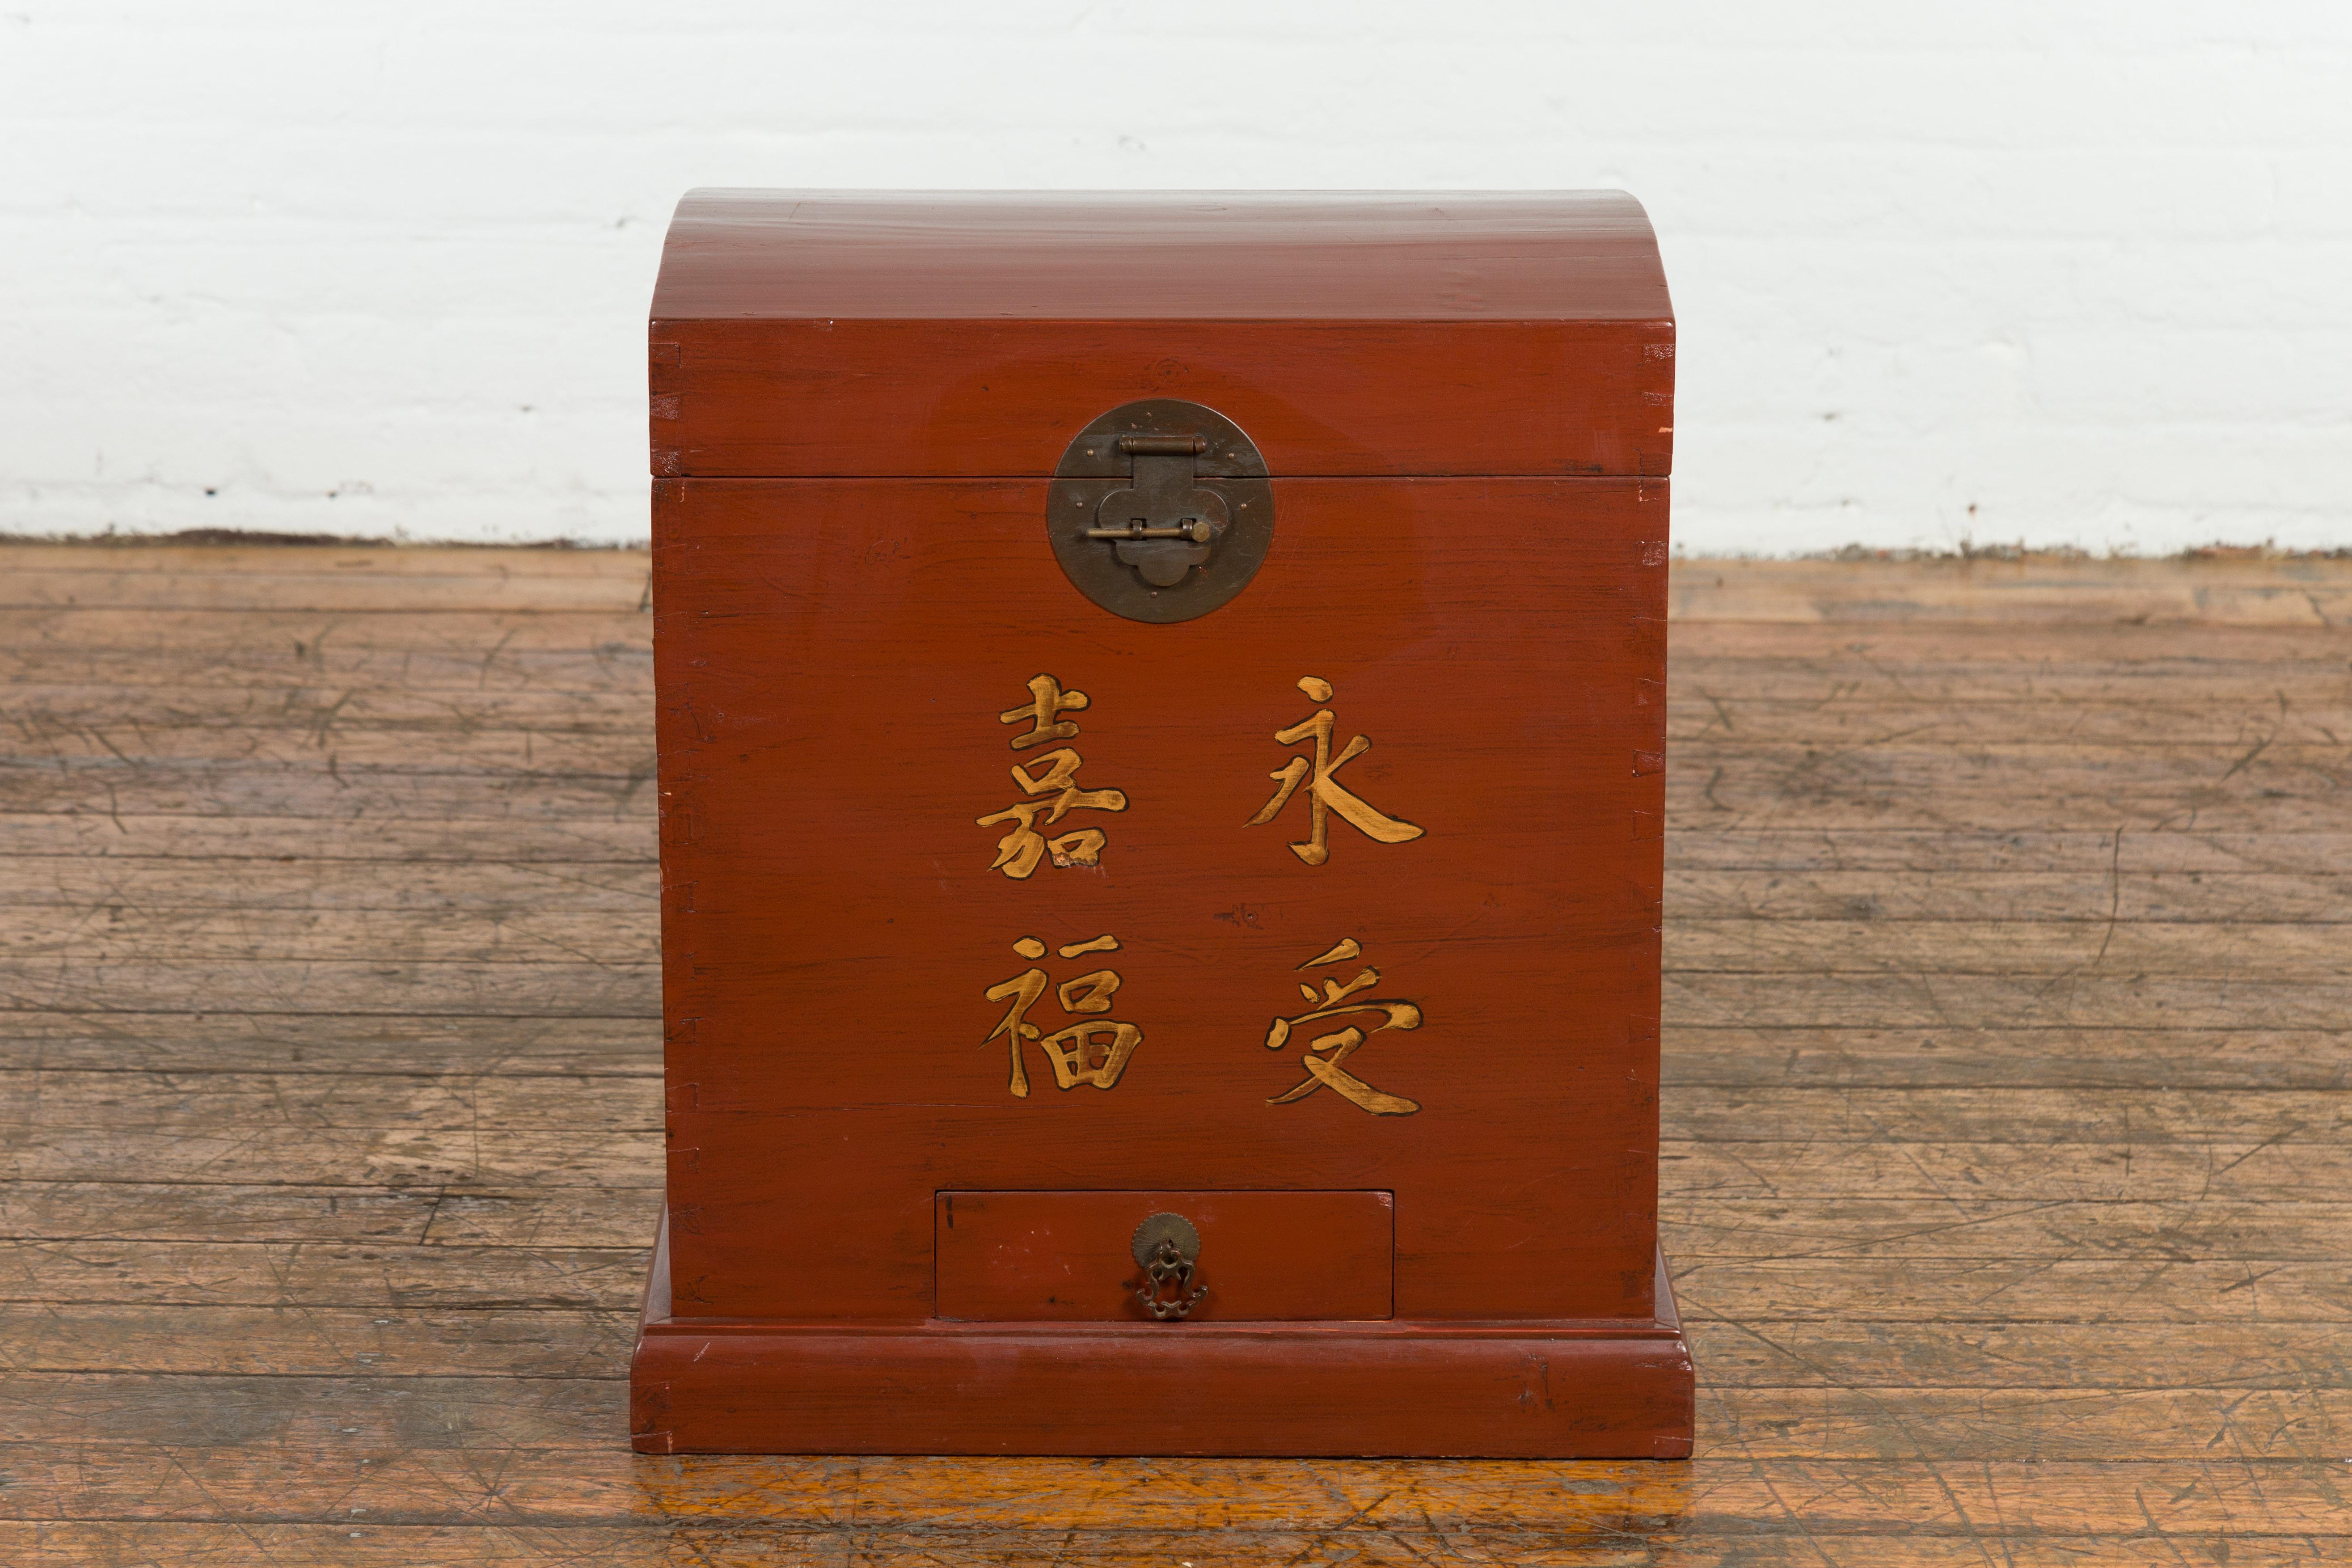 A vintage Chinese red lacquer wedding chest from the Mid-20th Century with gilded calligraphy, low drawer and brass hardware. Created in China during the midcentury period, this wedding chest showcases a red lacquer perfectly complimenting its clean